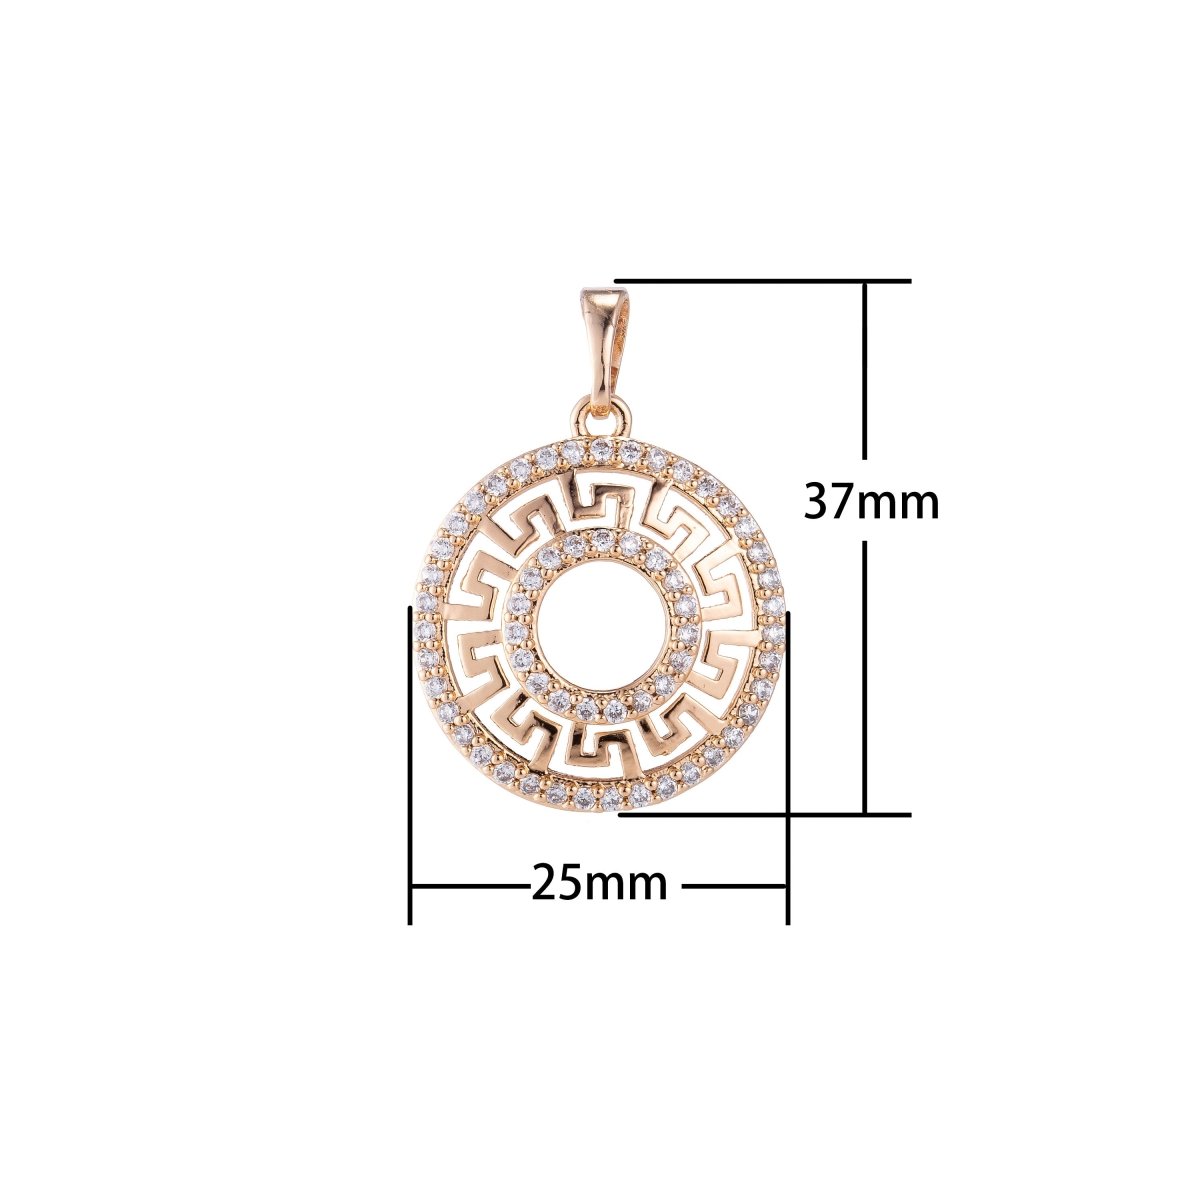 Gold Fill Round Circle Geometric Pattern, Classy Gift for Her, Elegant, Cubic Zirconia Necklace Pendant Charm Bead Bails Findings for Jewelry Making H-708 - DLUXCA